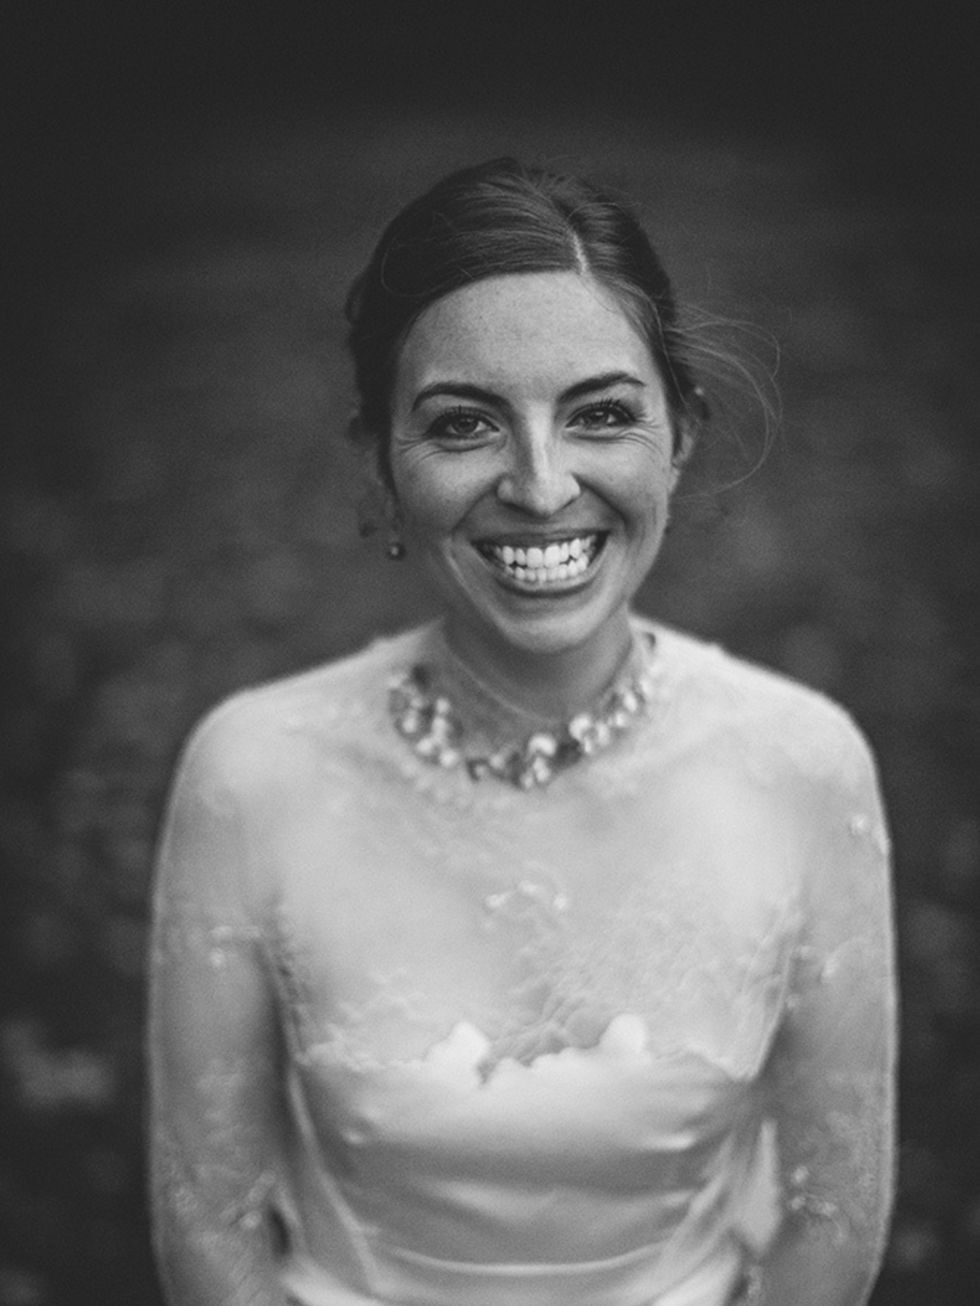 <p><strong>Bride</strong></p>

<p><strong>Gemma Garnham</strong></p>

<p><strong>Studio manager at Marios Schwab.Married Kevin Cooper in Oakwell Hall, Birstall</strong></p>

<p>I couldnt imagine wearing anyone elses design on my wedding day. I knew it 